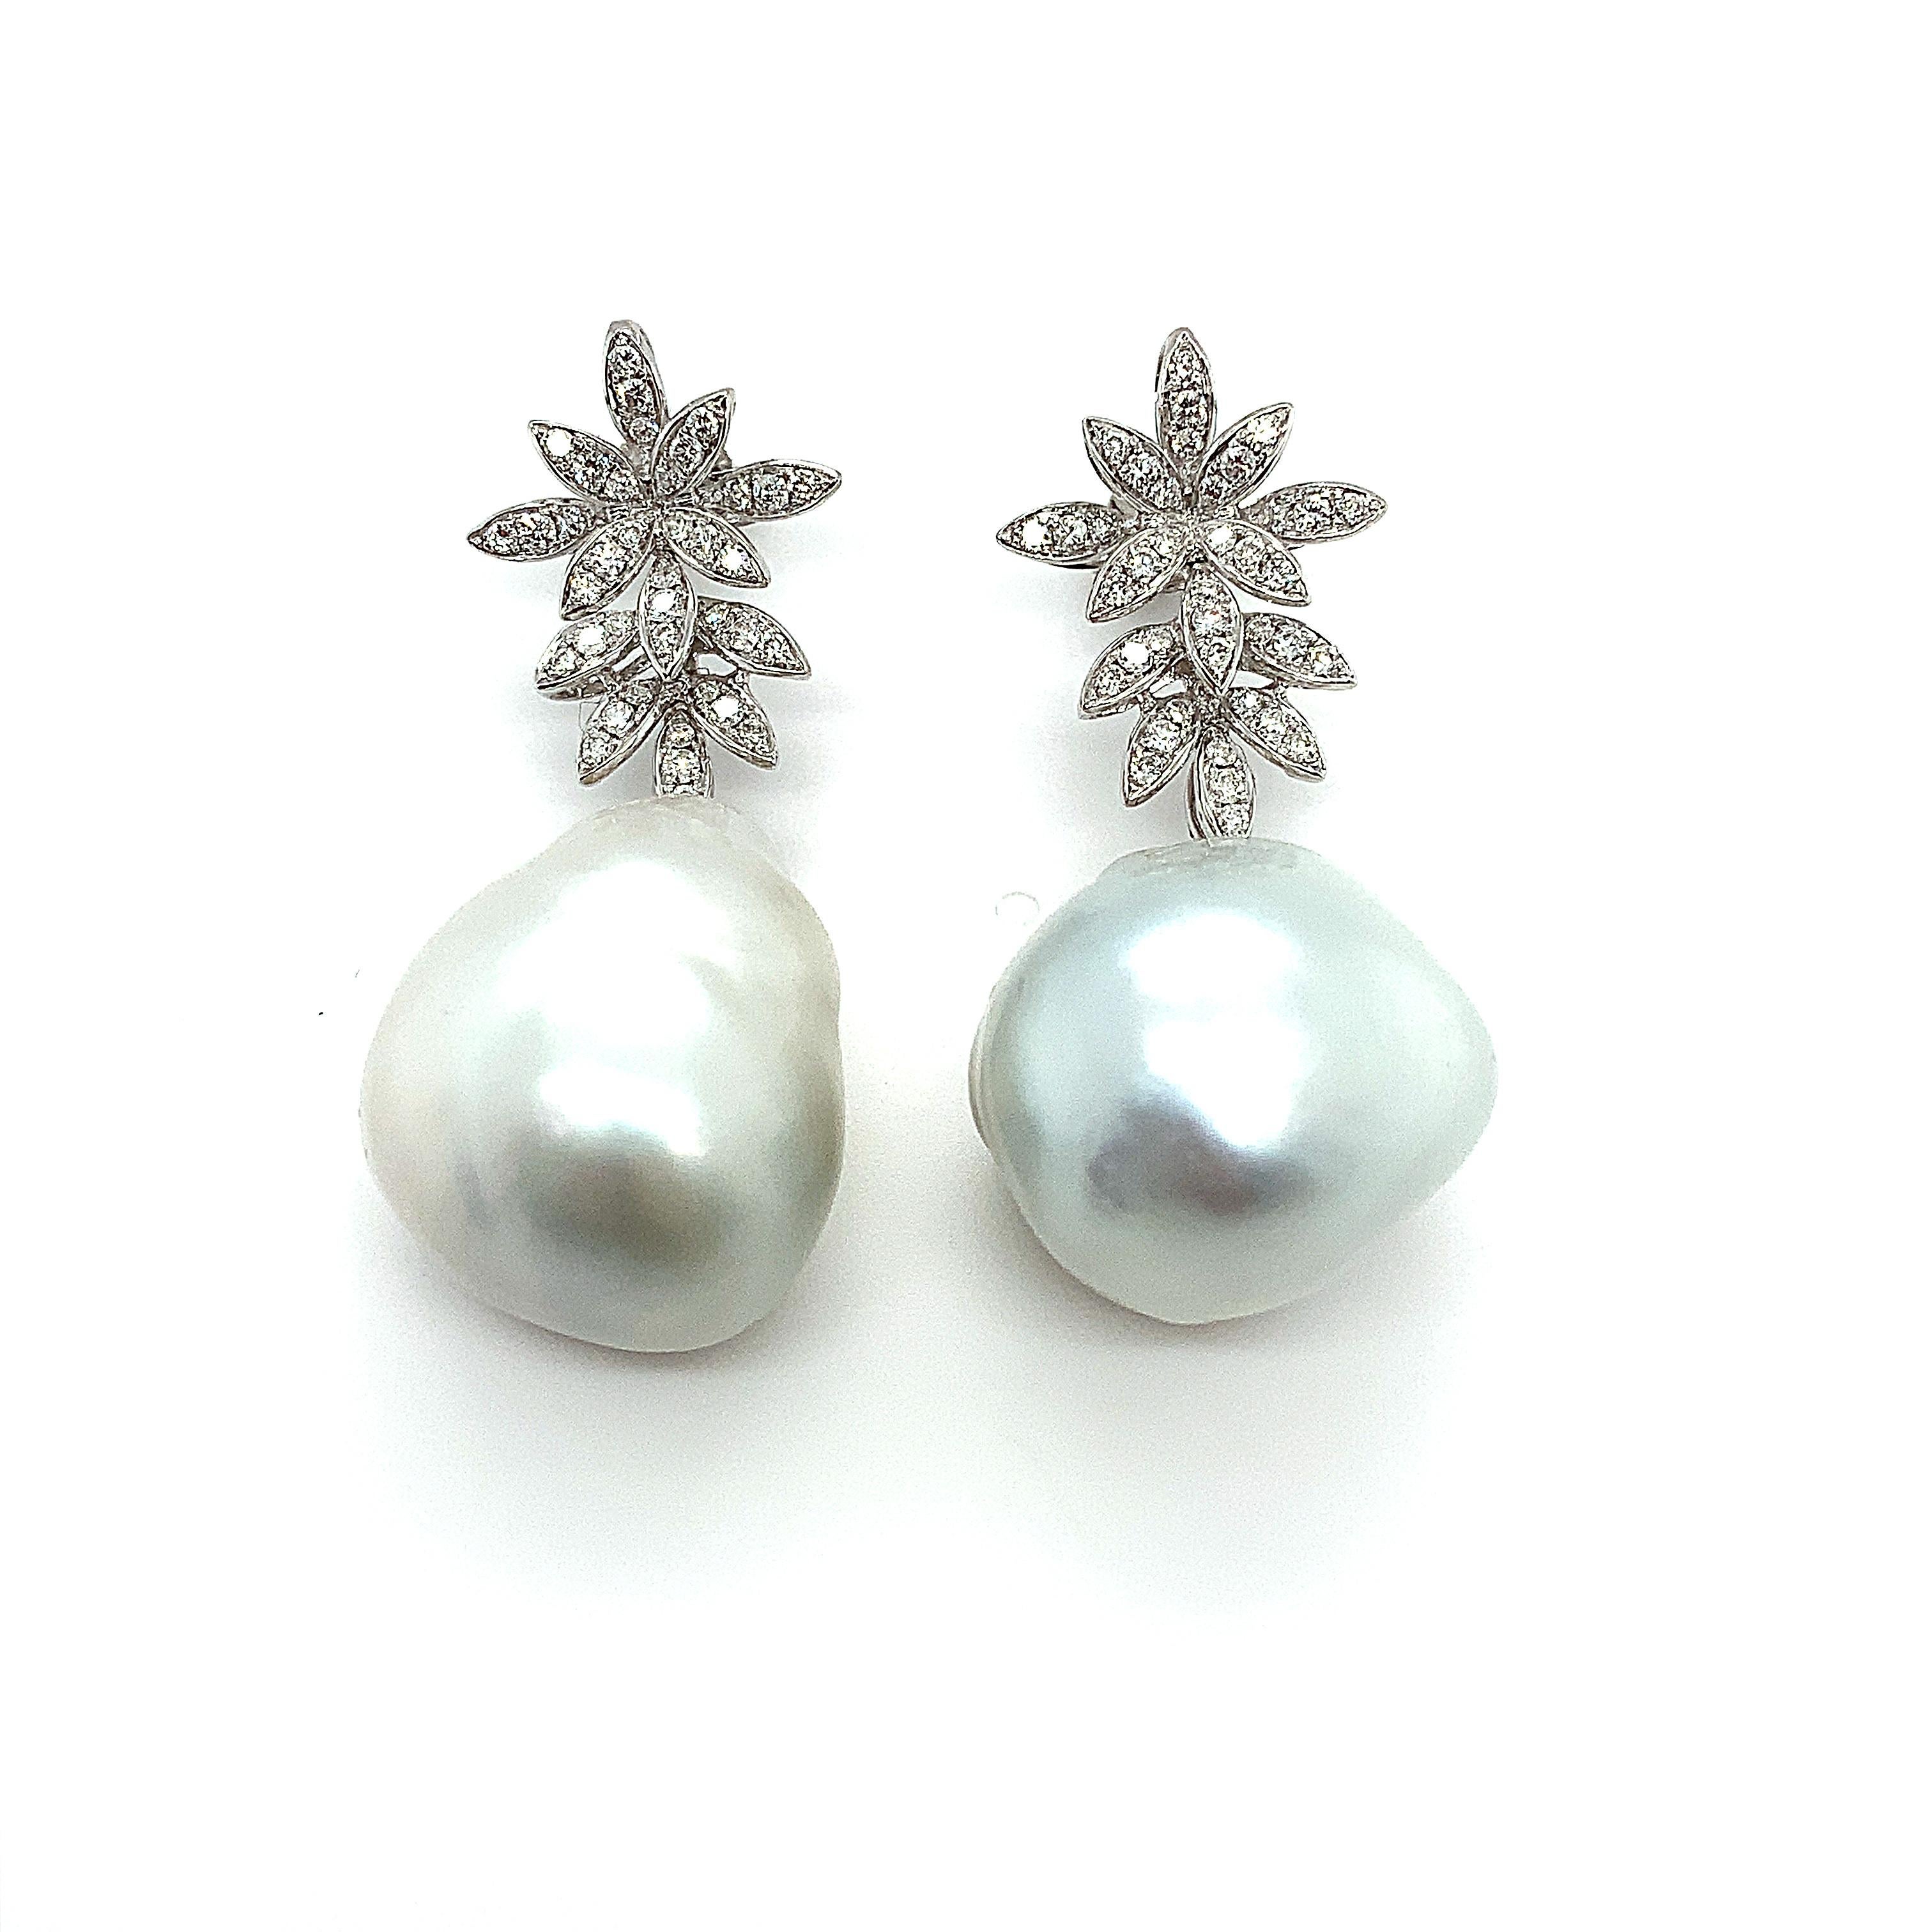 Magnificent pair of one such piece of drop shaped natural pearl and round brilliant diamonds  in 18K white gold.
The two pearls are slightly differ in shape and the size as the left pearl appears to be slightly longer in length than the right one,